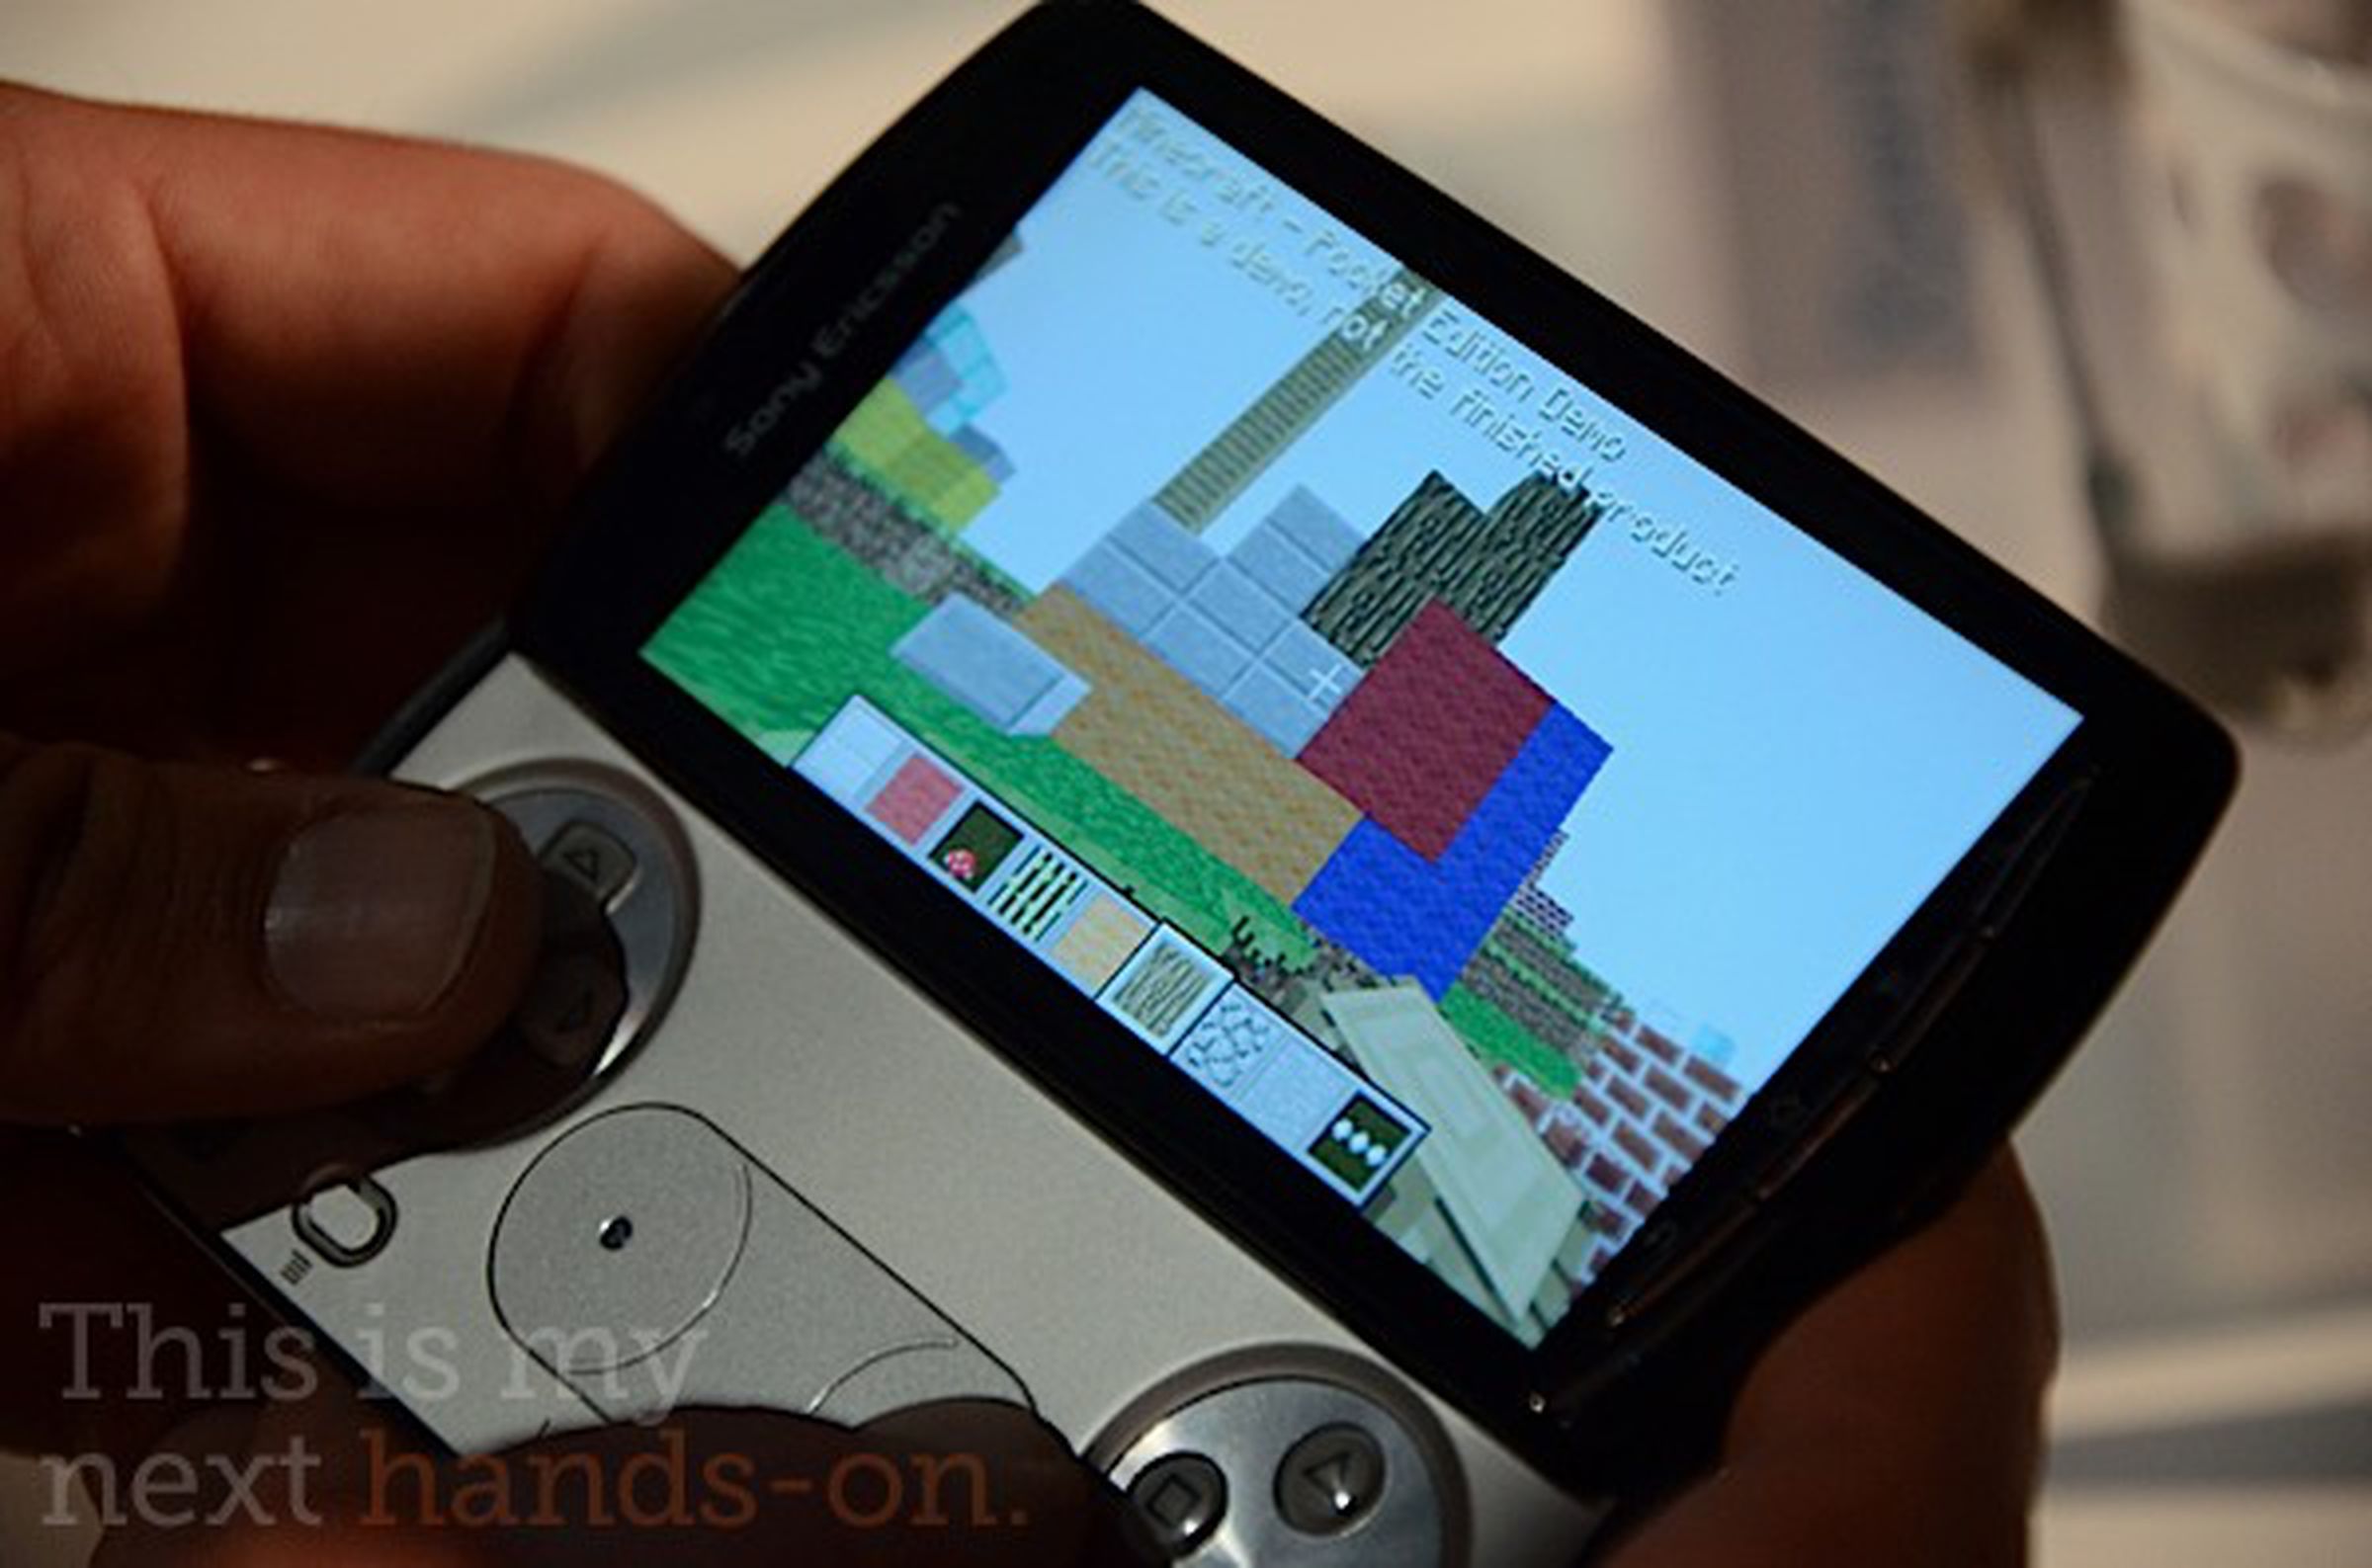 Minecraft Pocket Edition on the Xperia Play